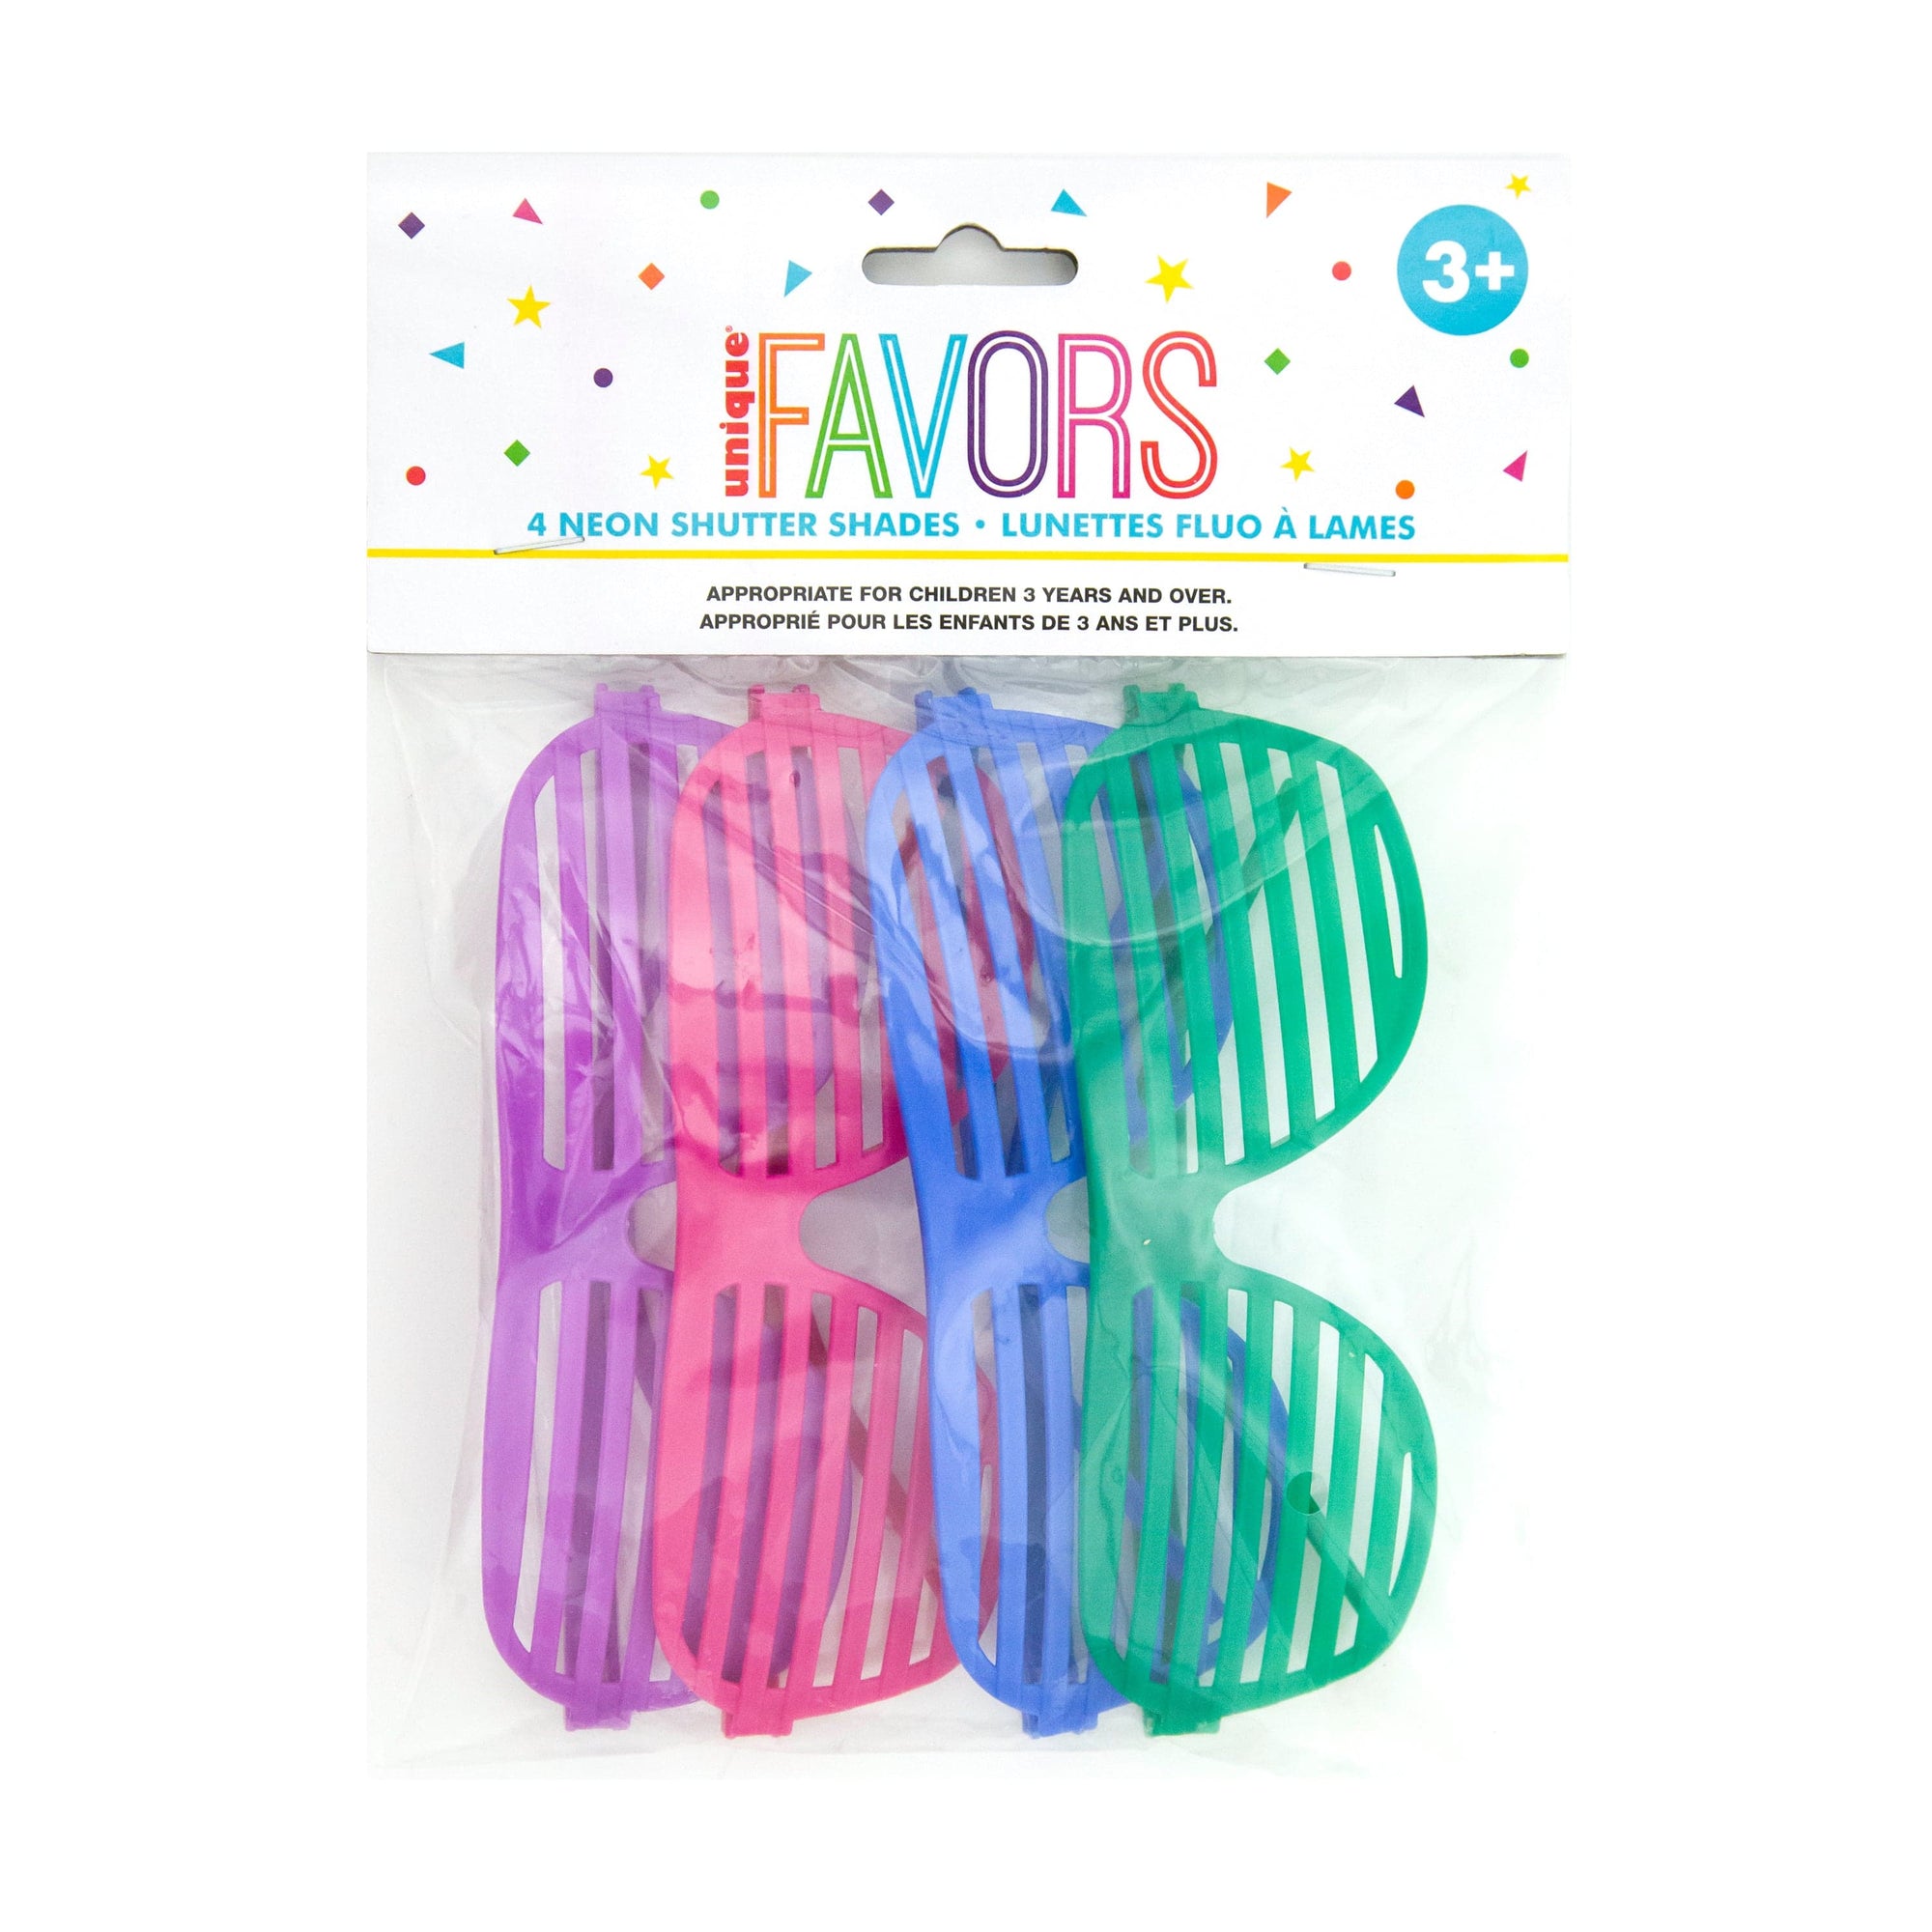 Unique Industries TOYS Neon Shutter Shade Glasses Party Favors